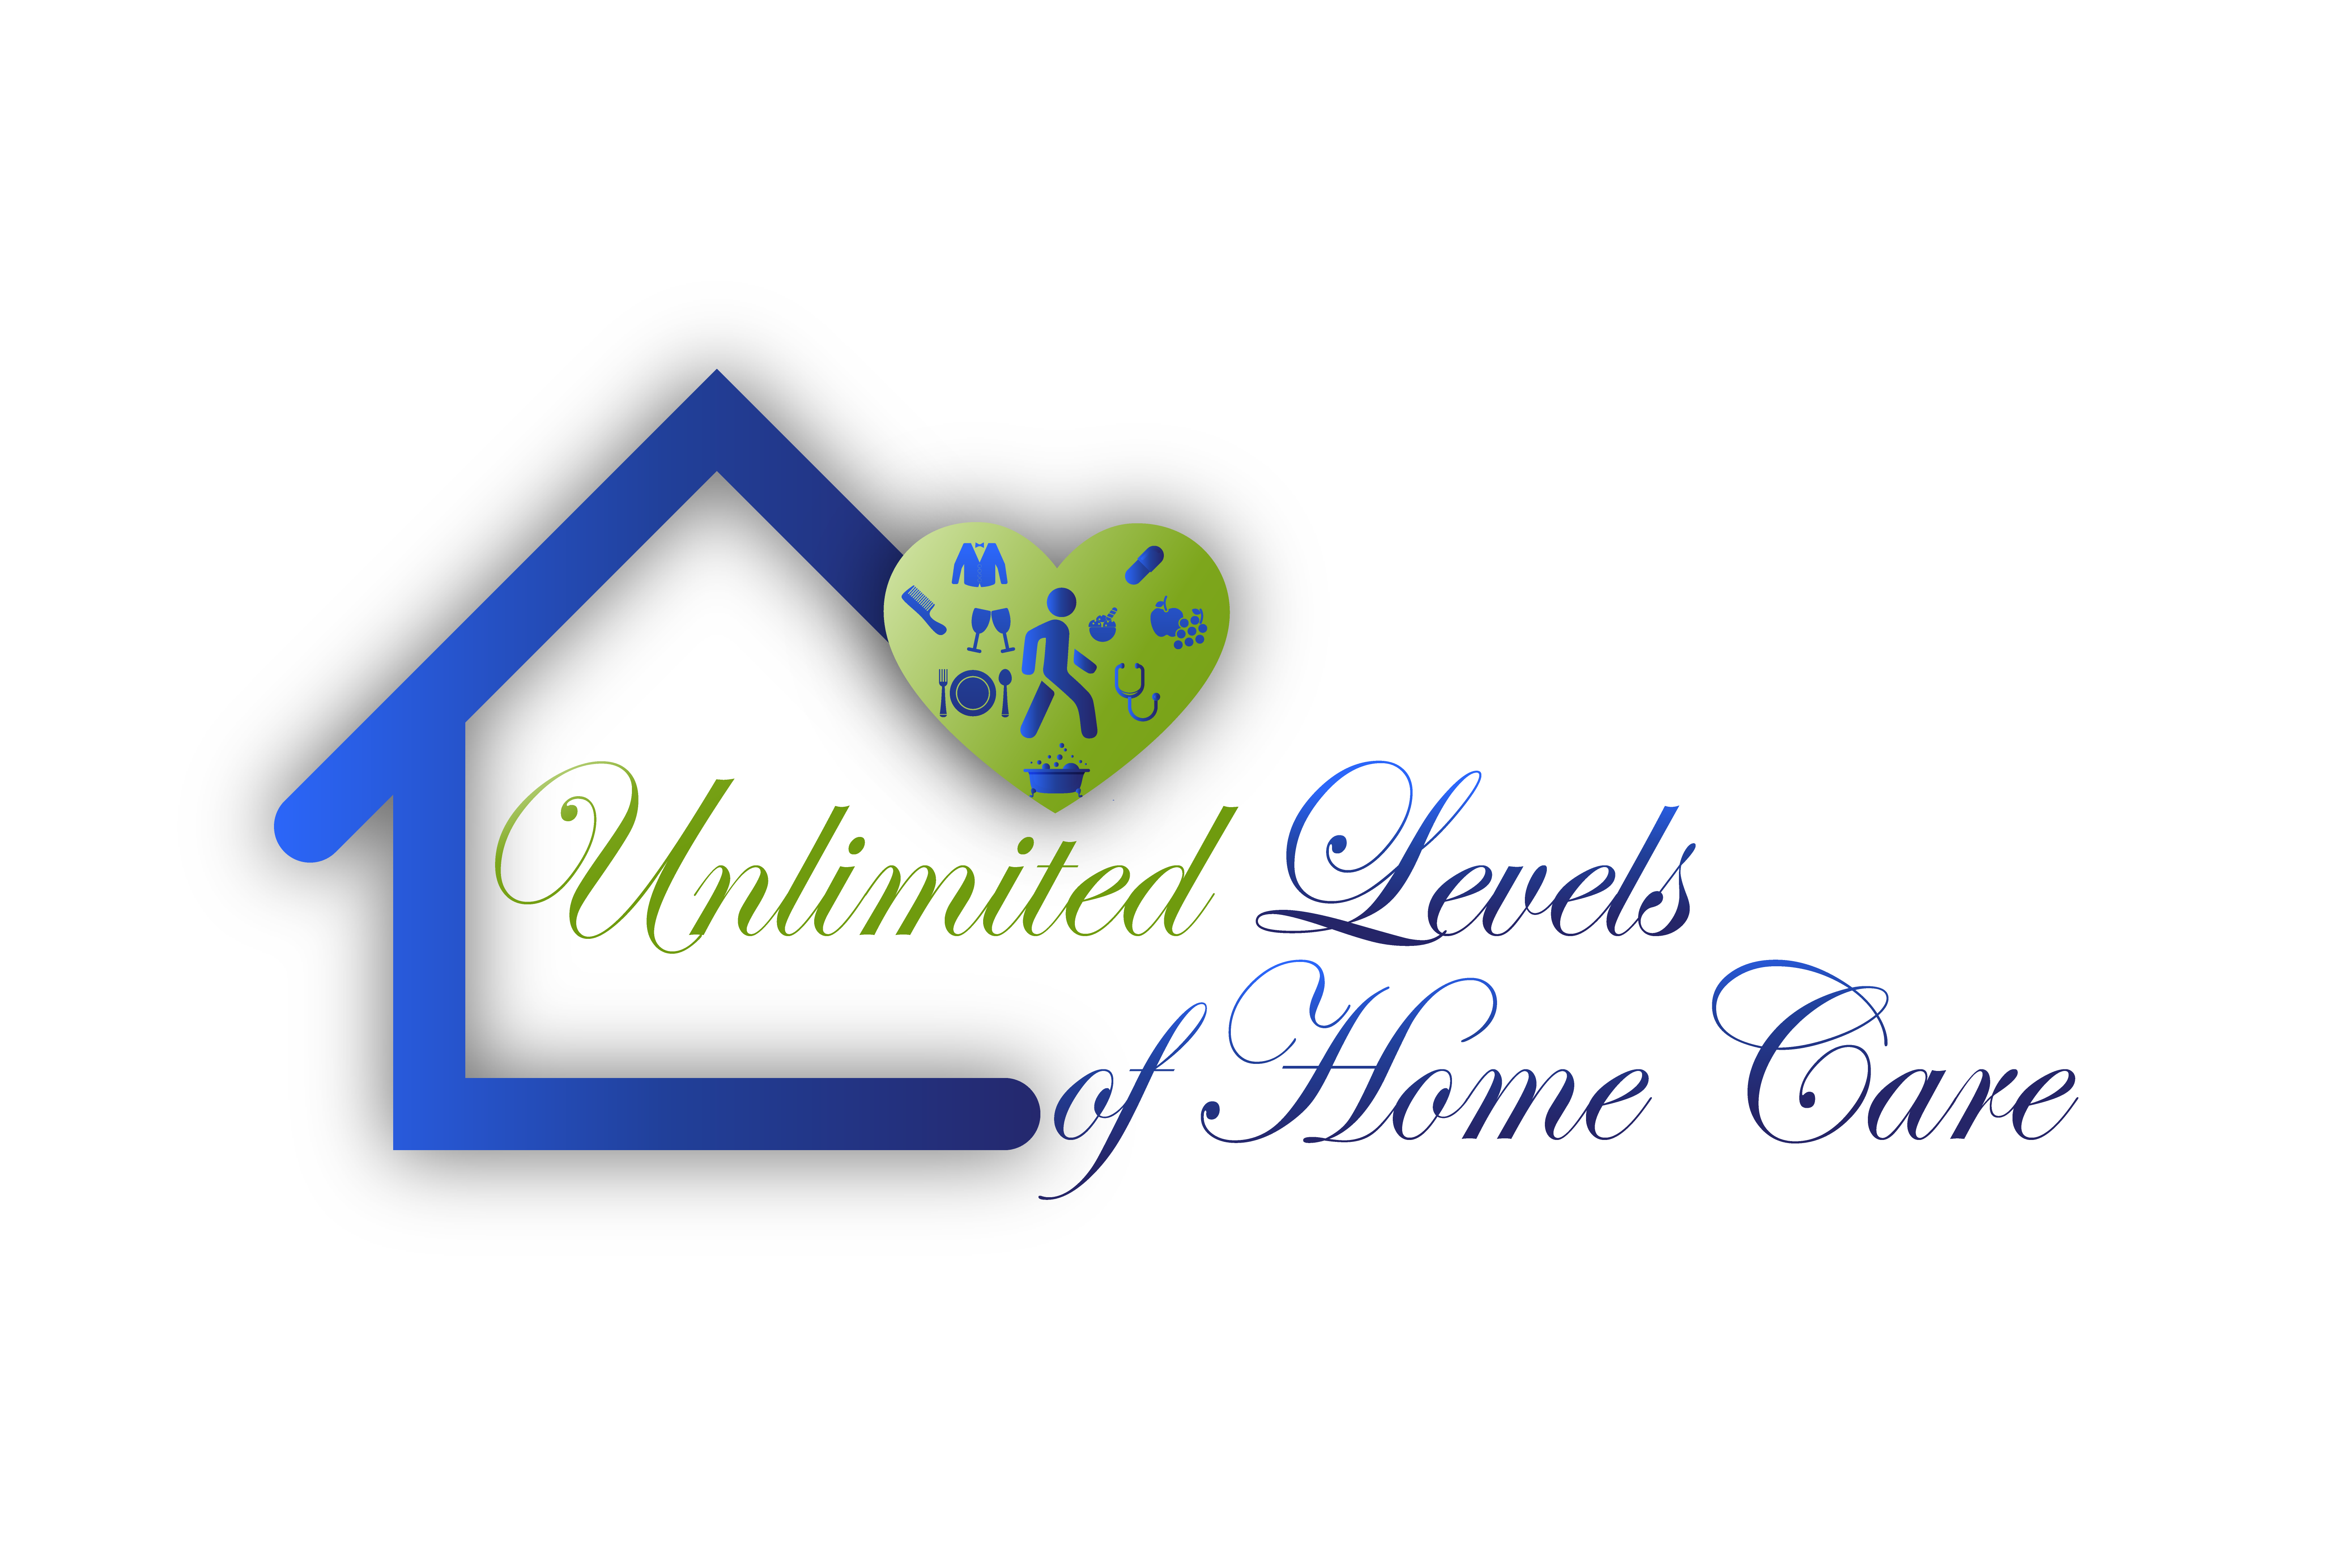 Unlimited Levels of Home Care LLC at Chester, PA